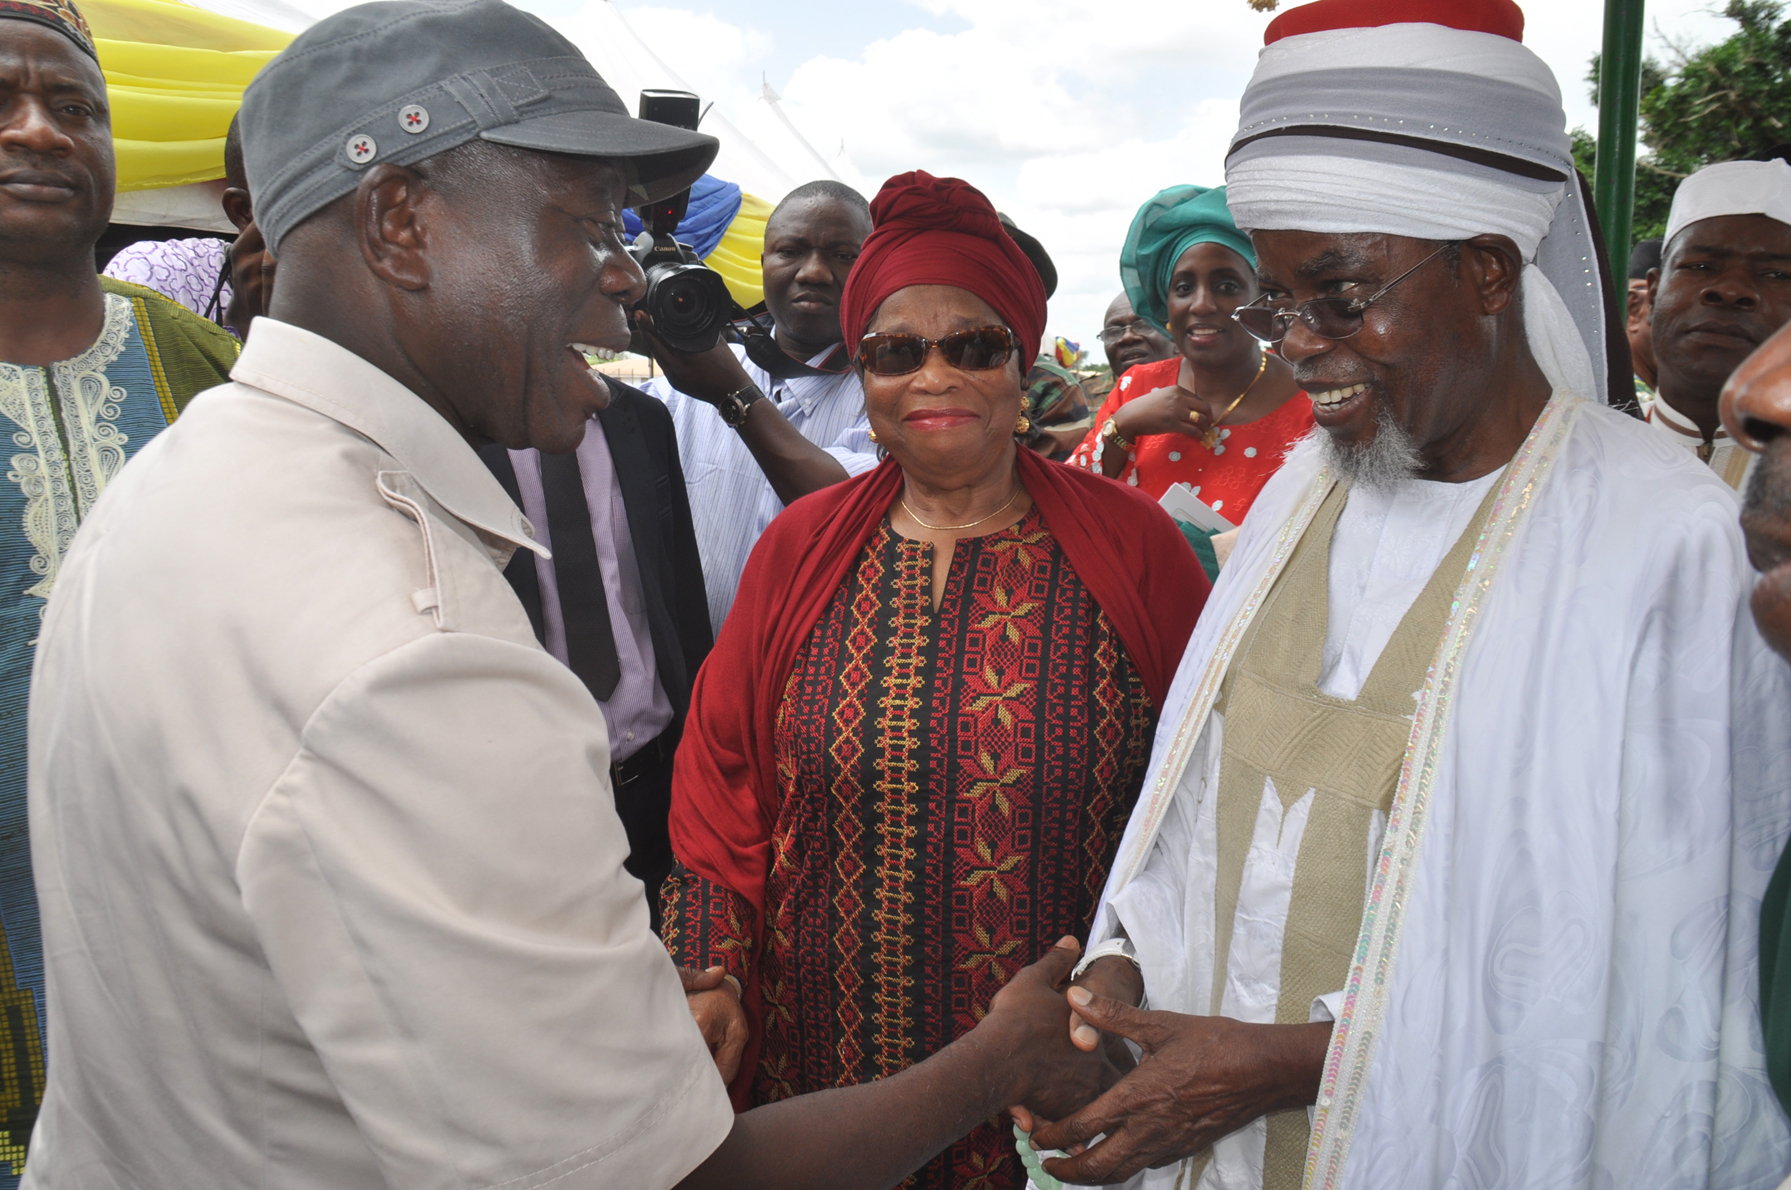 Governor Adams Oshiomhole of Edo State (left) HRH Haliru Momoh, Ikelebe 111, Otaru of Auchi and retired Justice Constance Momoh at the Farewell Parade and Pulling-Out Ceremony of 15 retired Generals of the Nigerian Army School of Electrical and Mechanical Engineering (NAEME) in Auchi, last weekend.